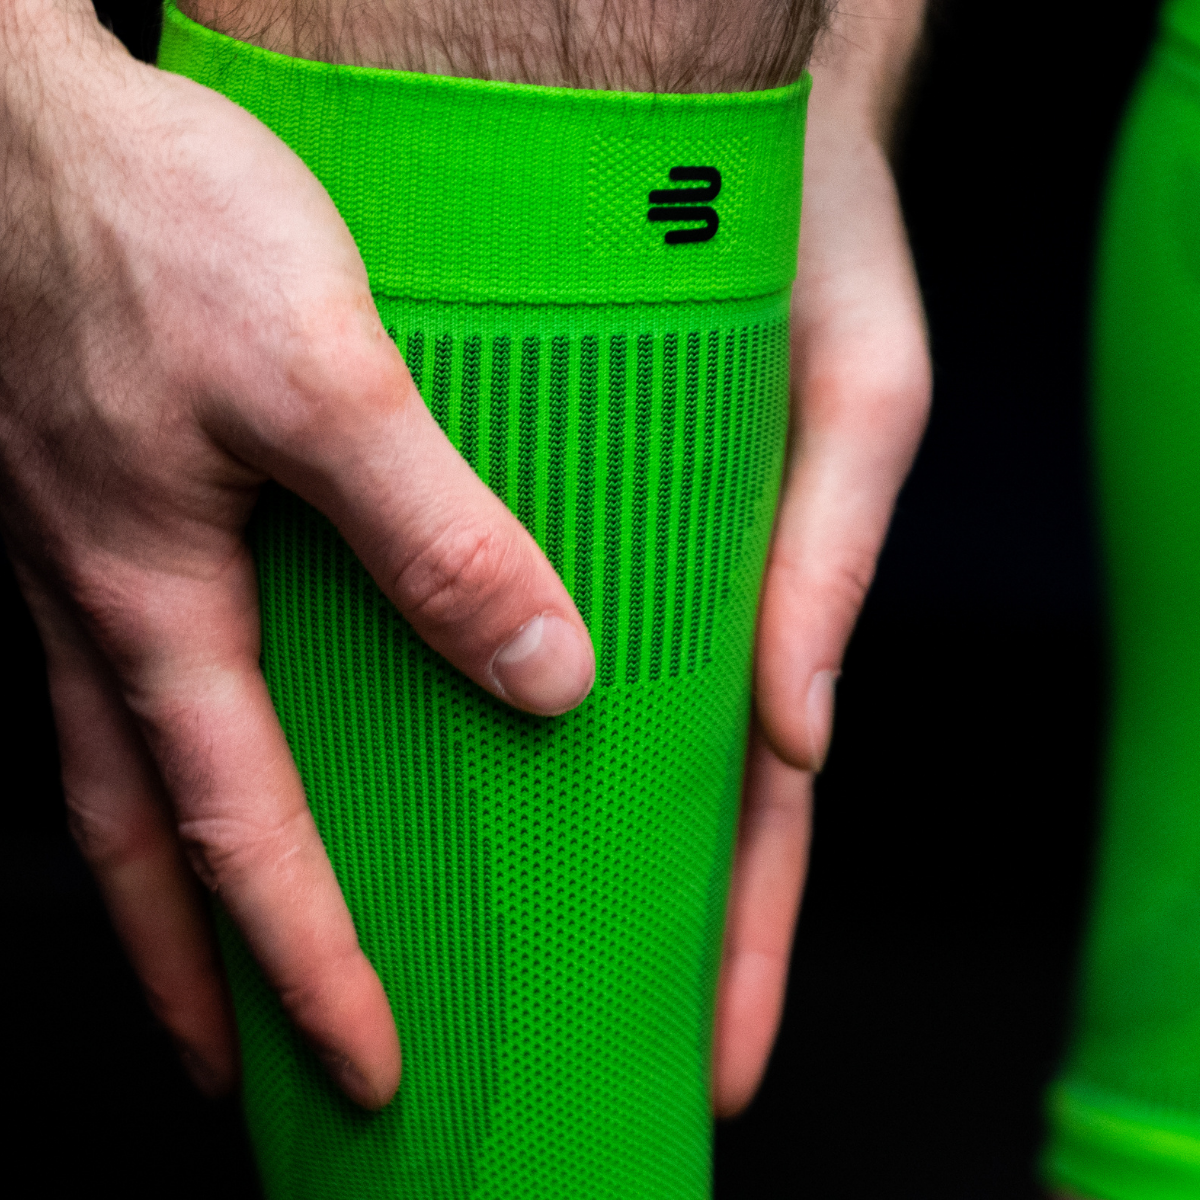 Knit Calf Compression Sleeves